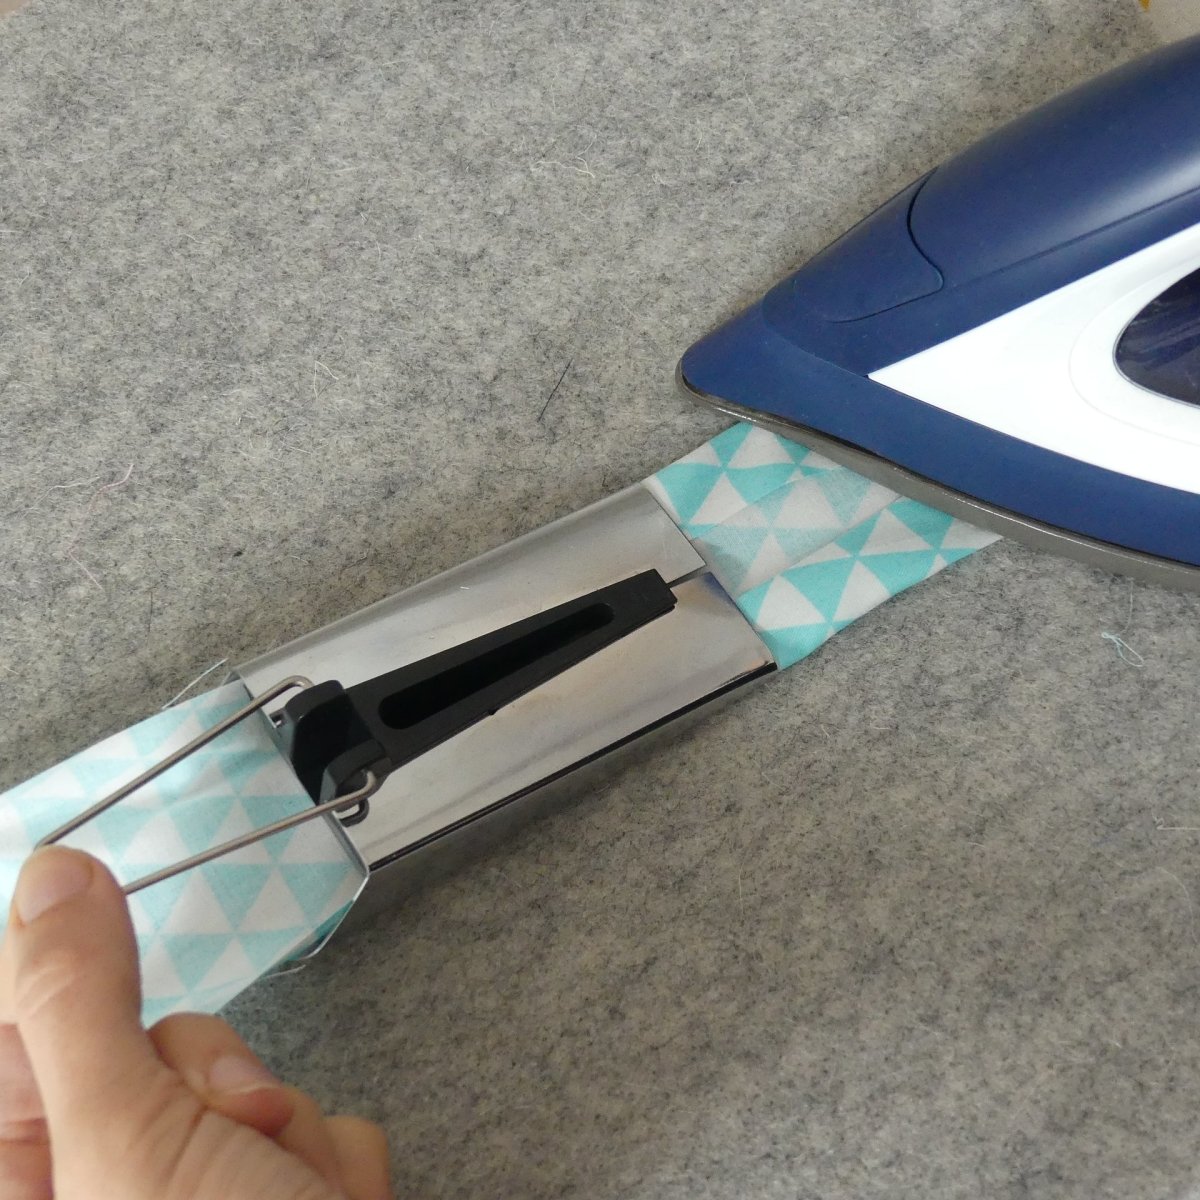 Ironing bias tape as it comes out of the Extra Large (XL) Bias Tape Maker